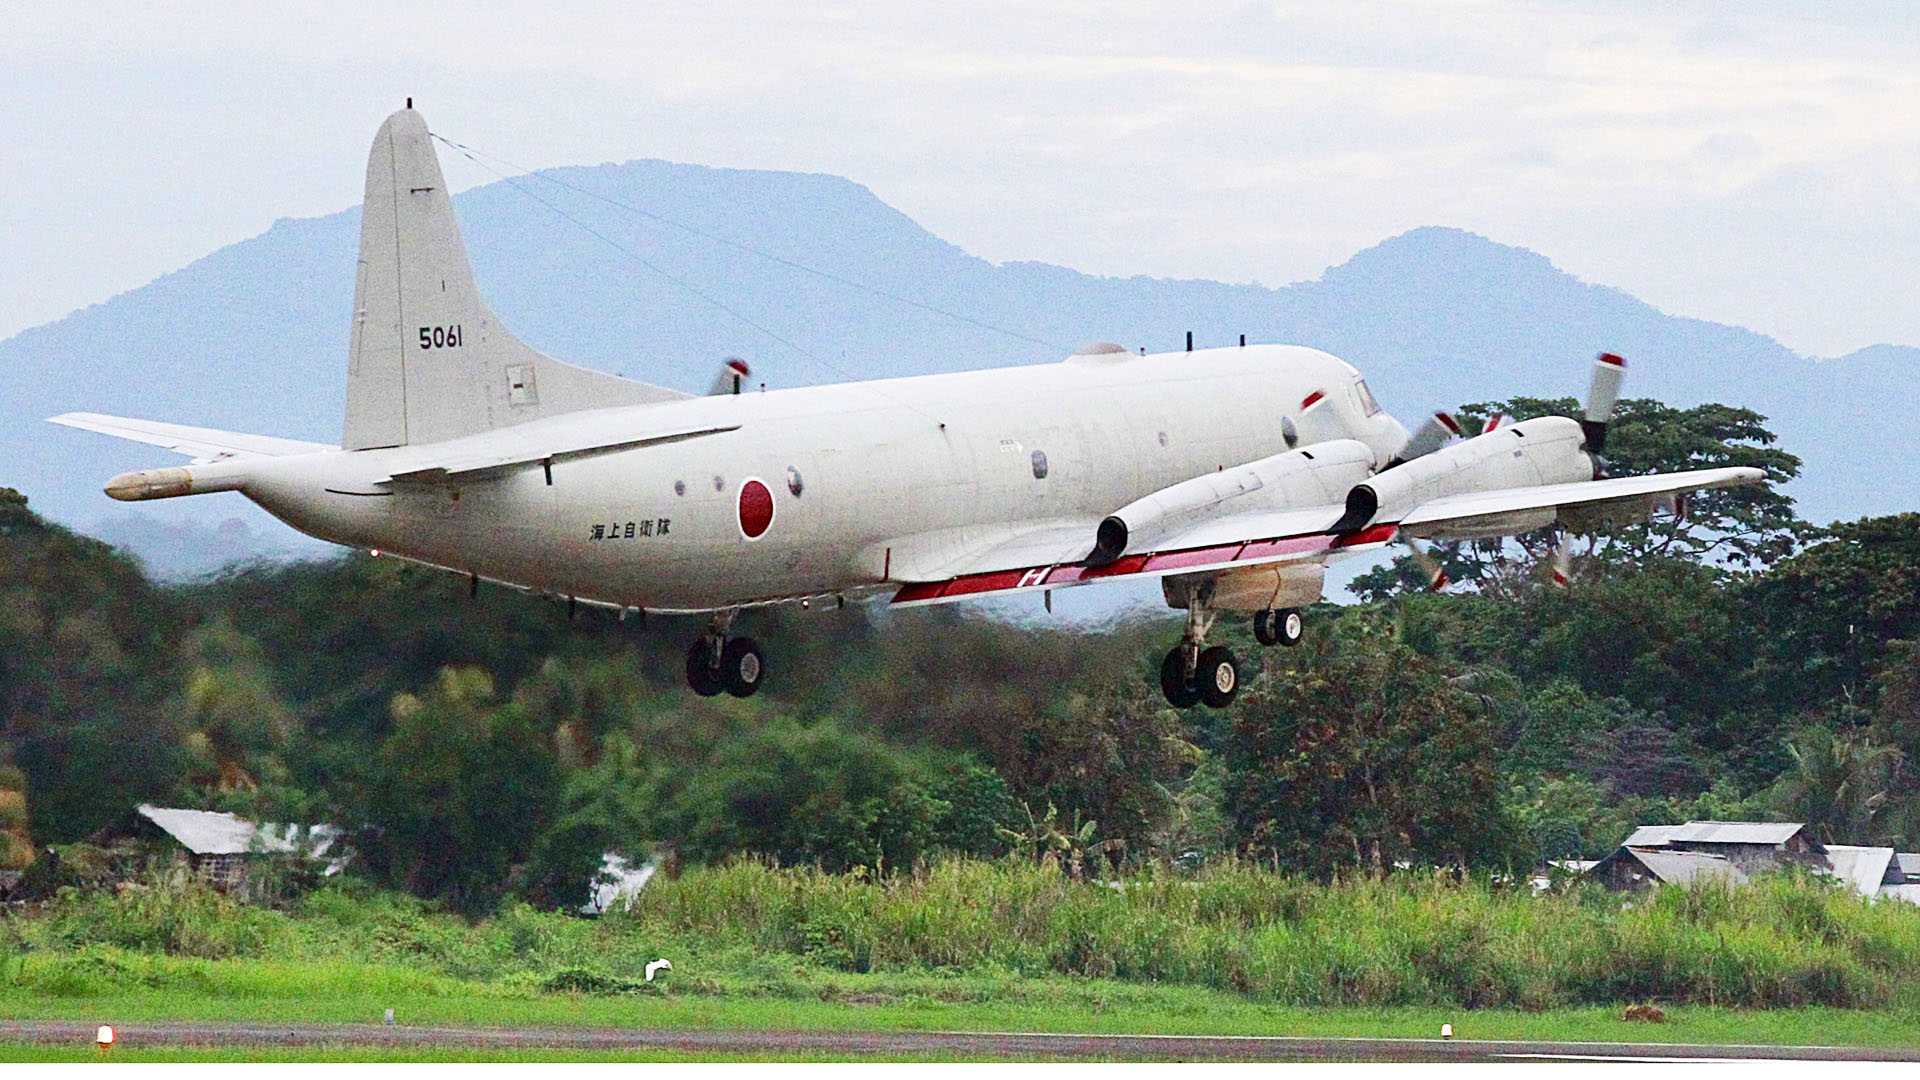 A Japanese Maritime Self-Defence Force P-3C patrol plane takes off from an airport in Puerto Princesa on Palawan Island in the western Philippines on Tuesday, to participate in joint exercises with Philippine forces in the face of China's growing assertiveness in the South China Sea. Photo: Kyodo